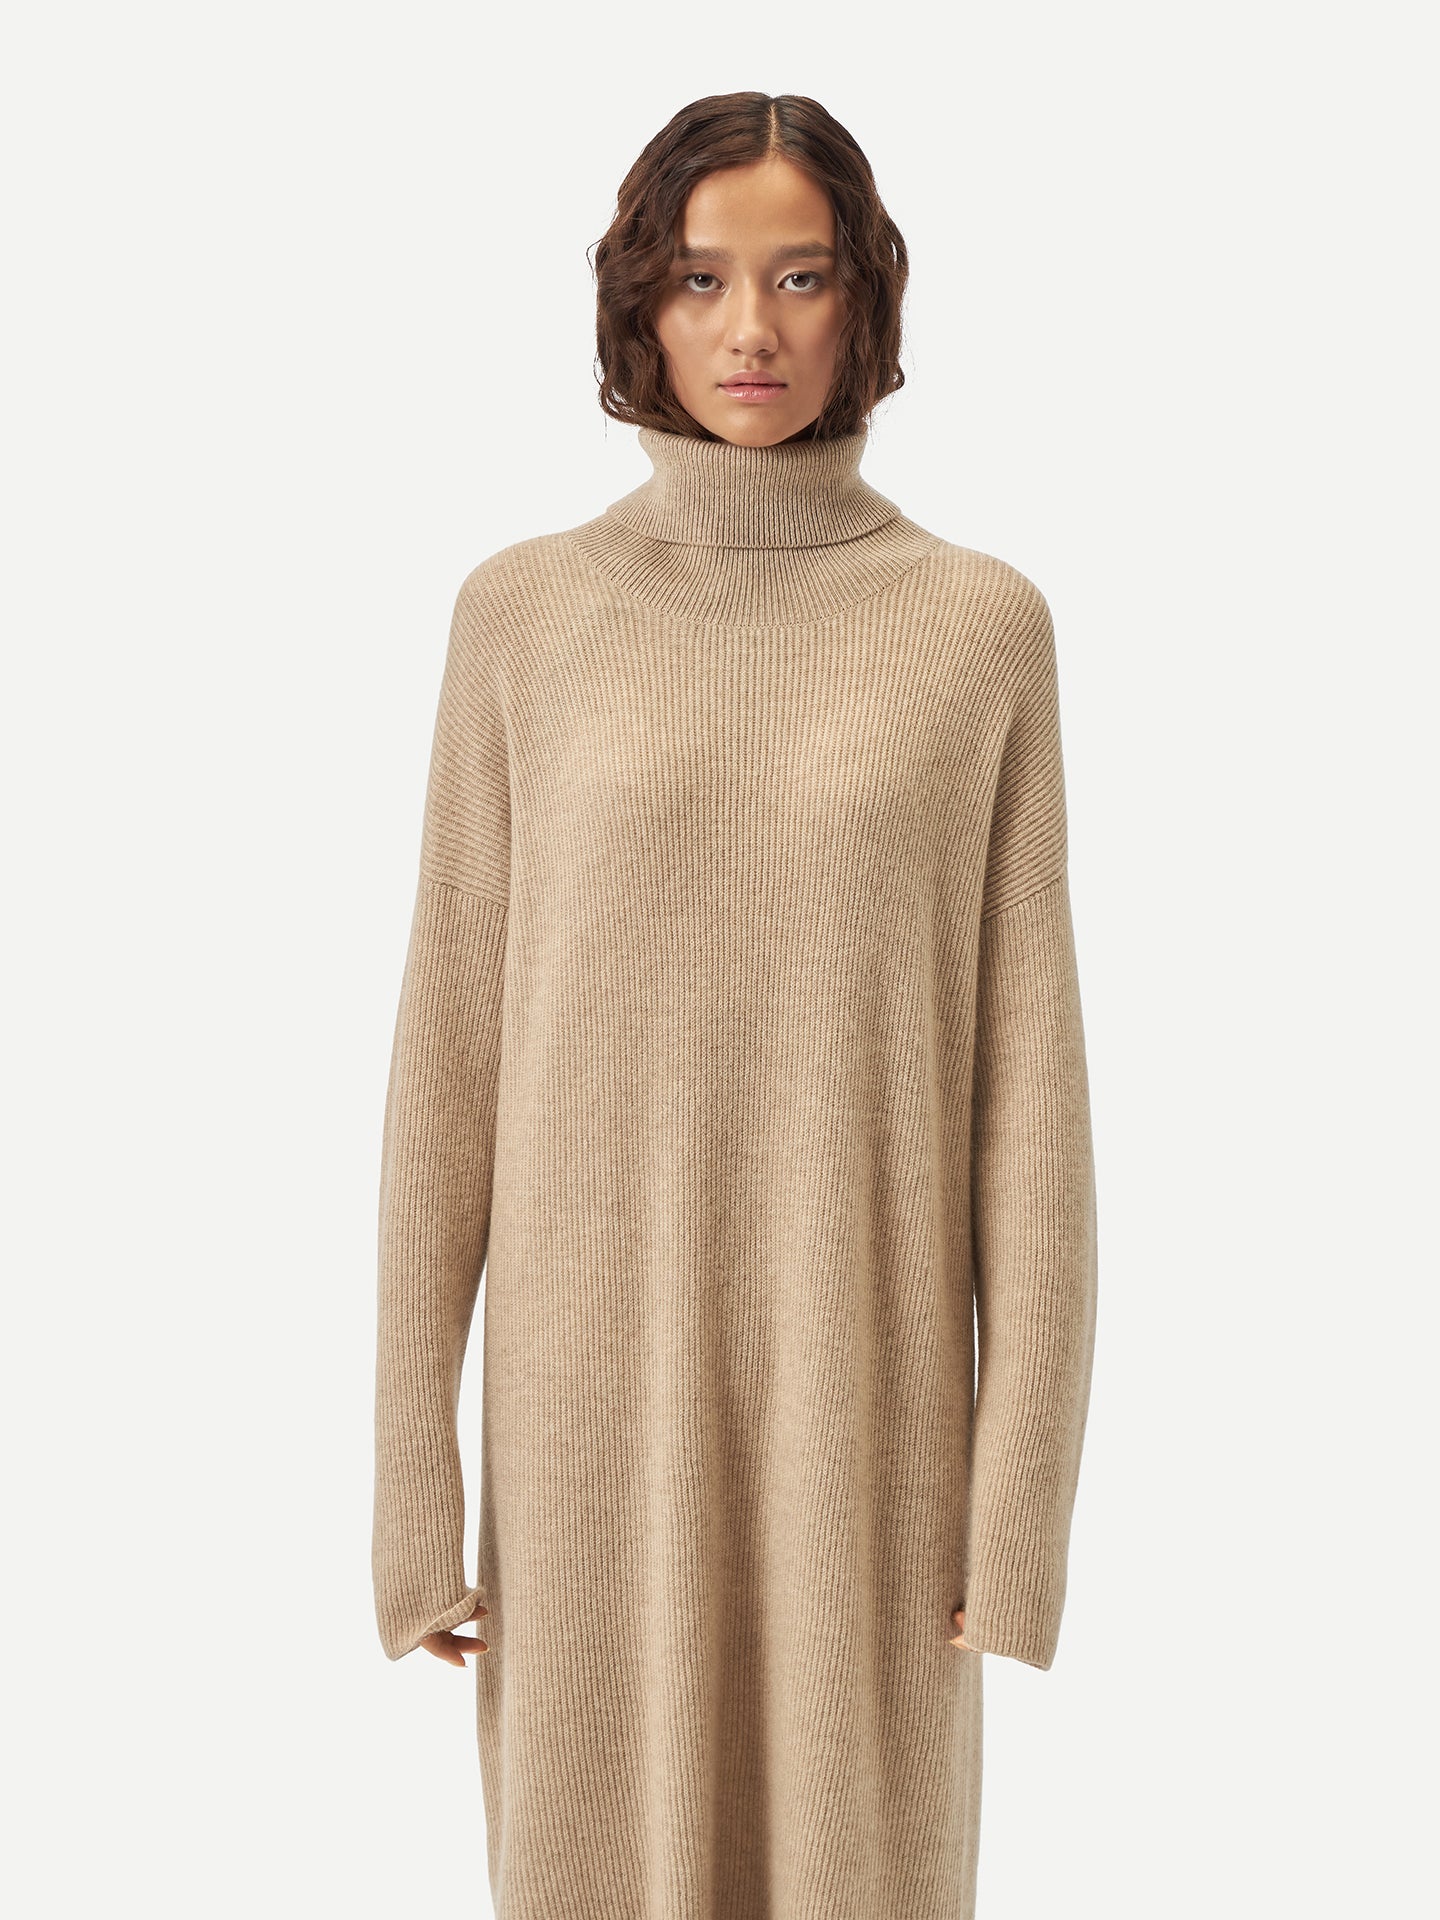 The 54 Best Sweater Dresses of 2023 For Cozy-Chic Style